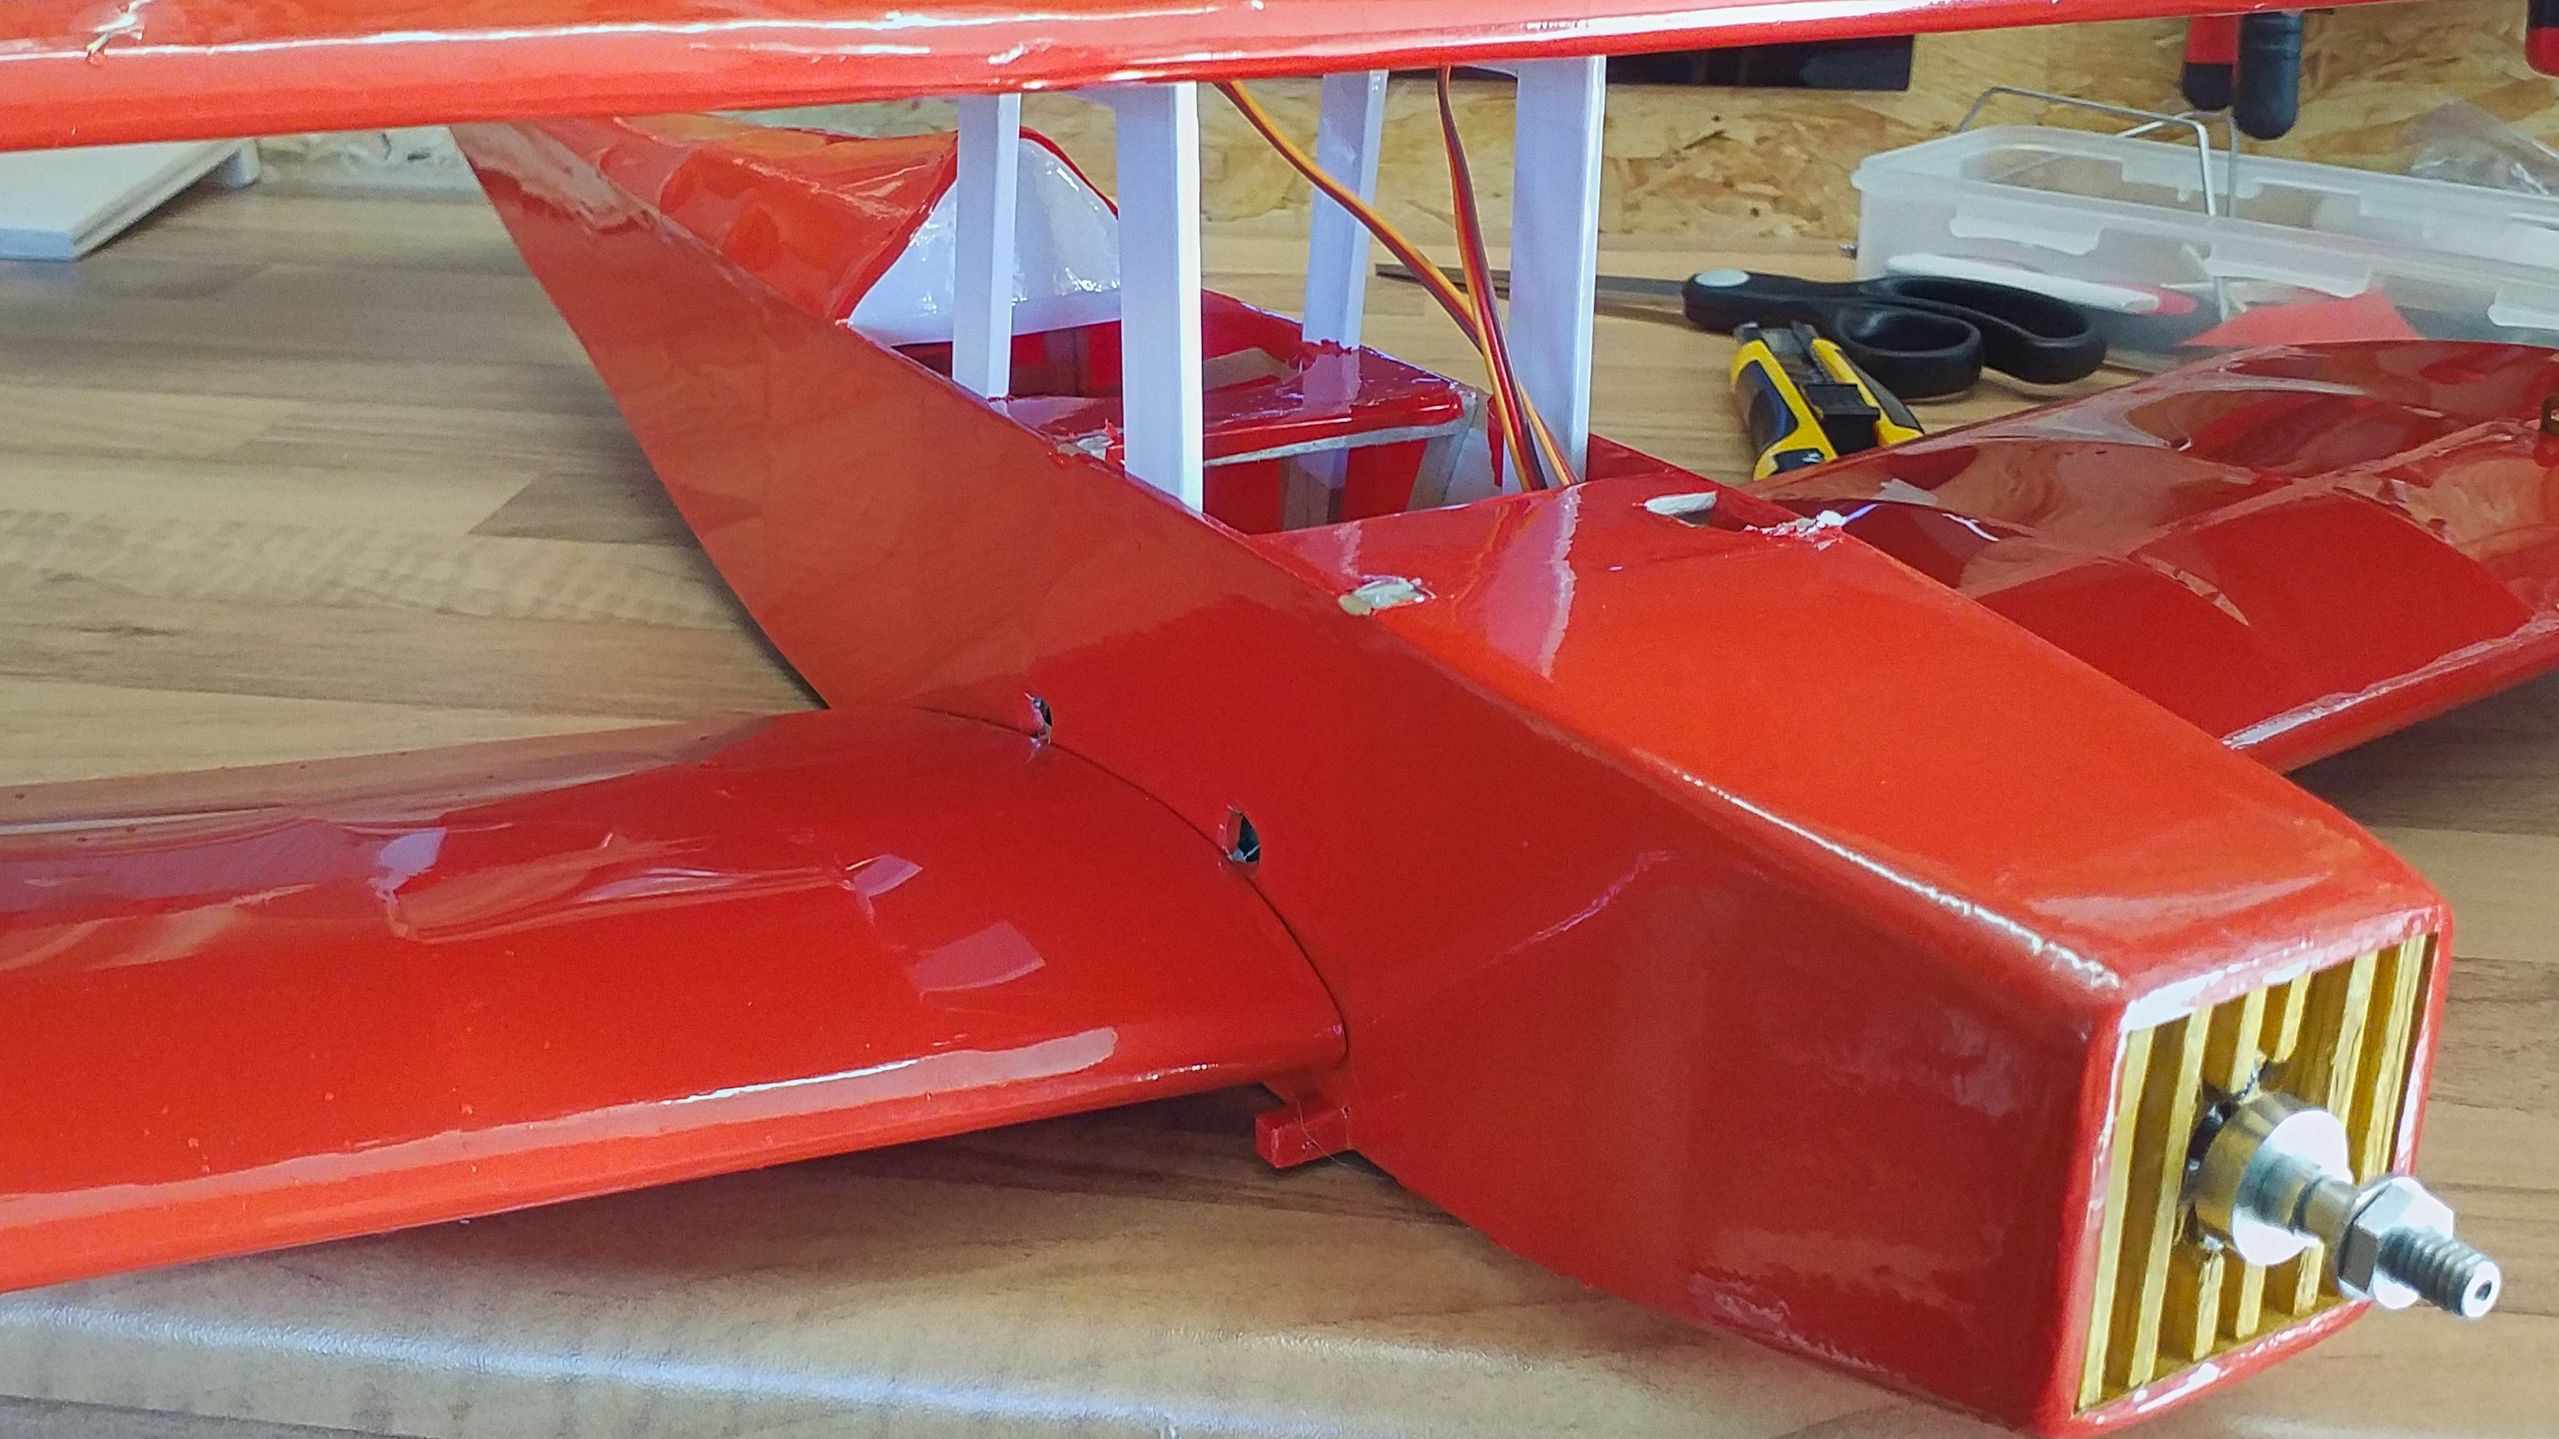 The new wing mounting made from plywood is seated farther to the rear.